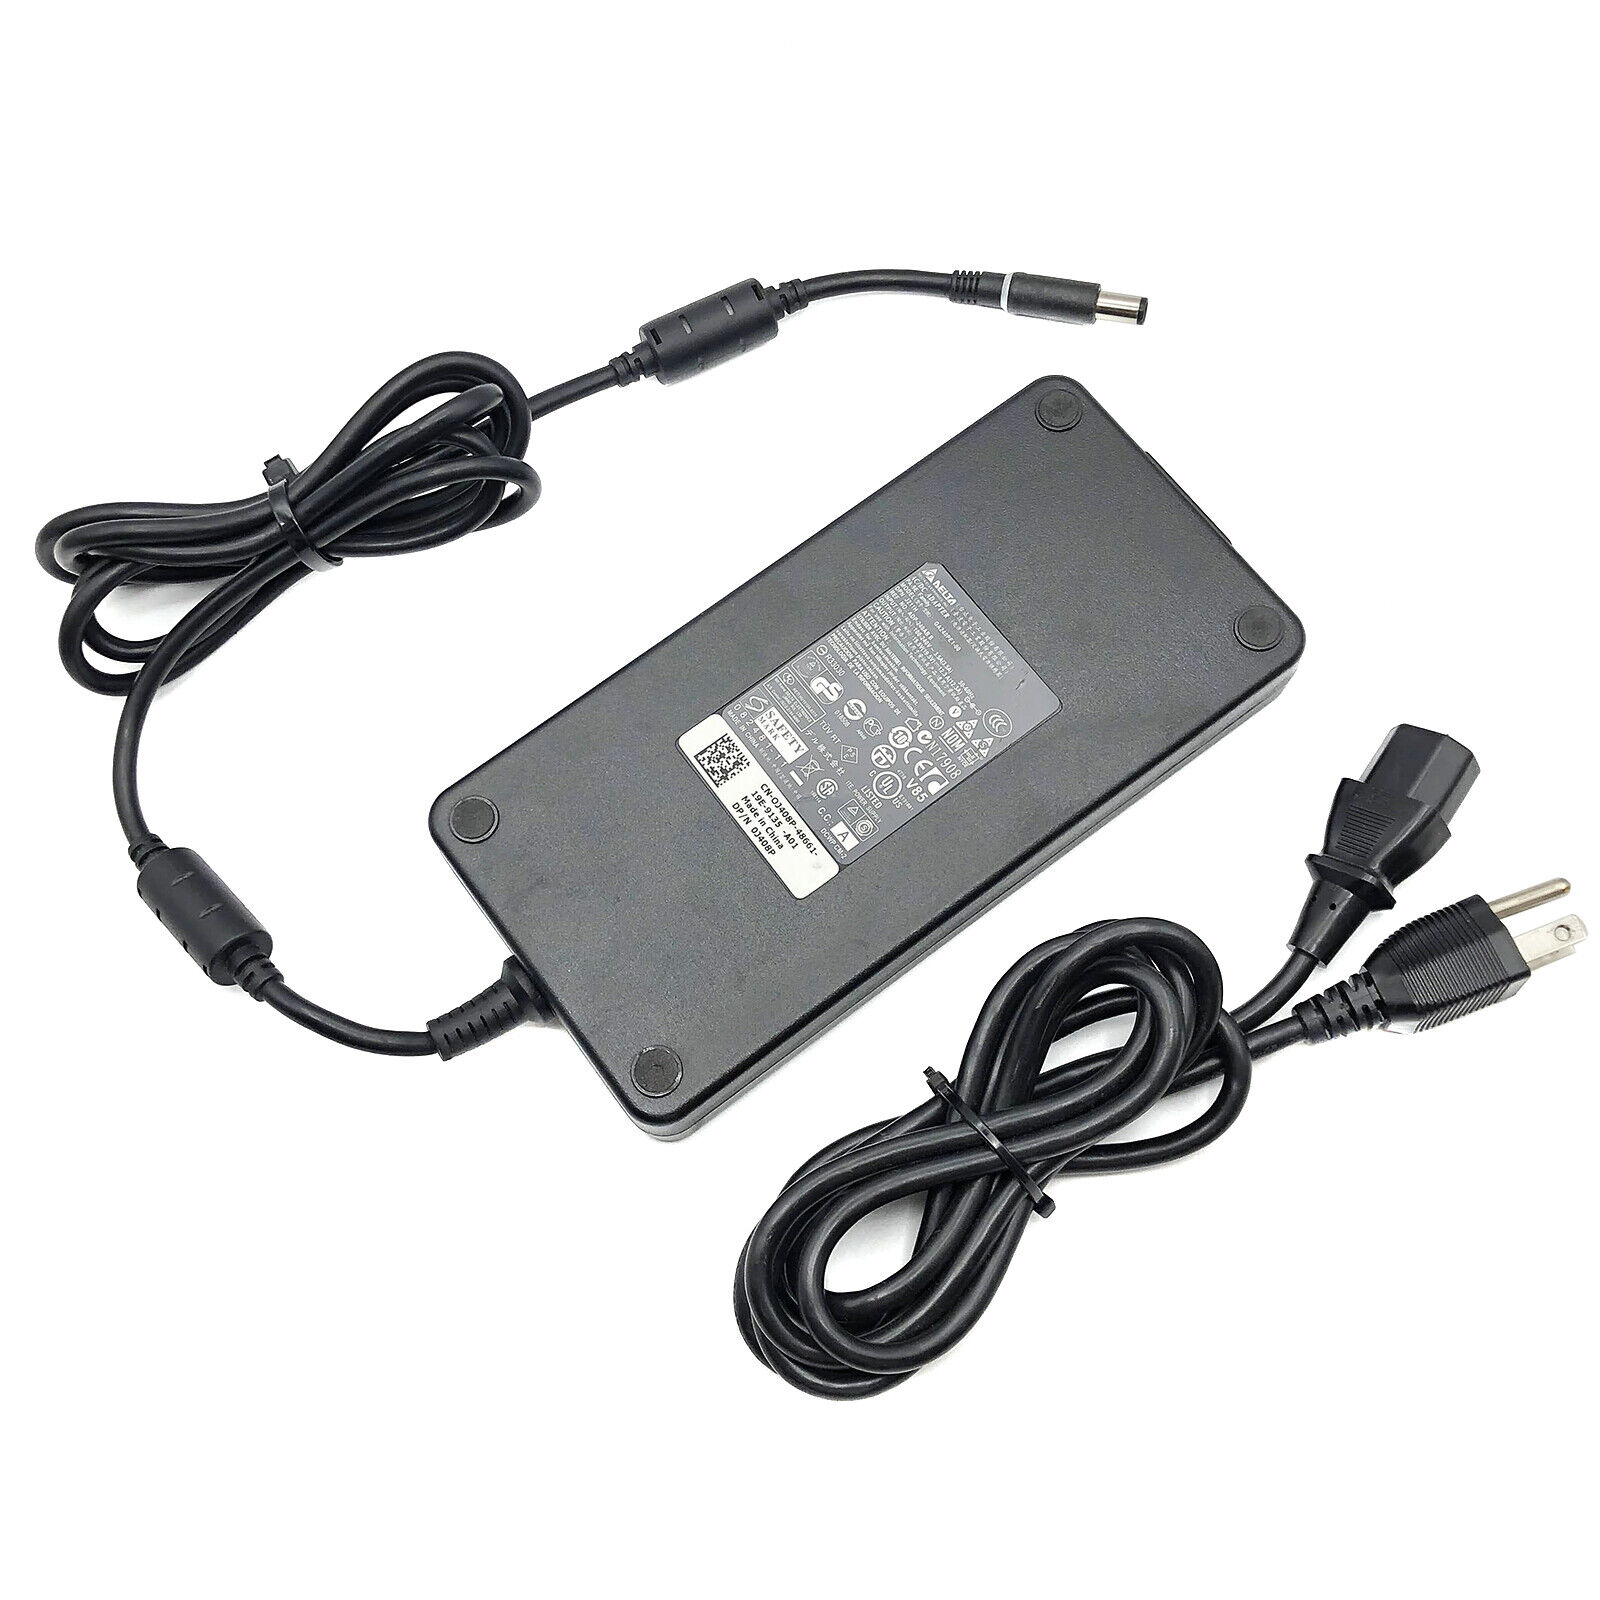 Original Delta AC Power Adapter ADP-240AB B J211H 240W Dell Laptop Charger w/PC